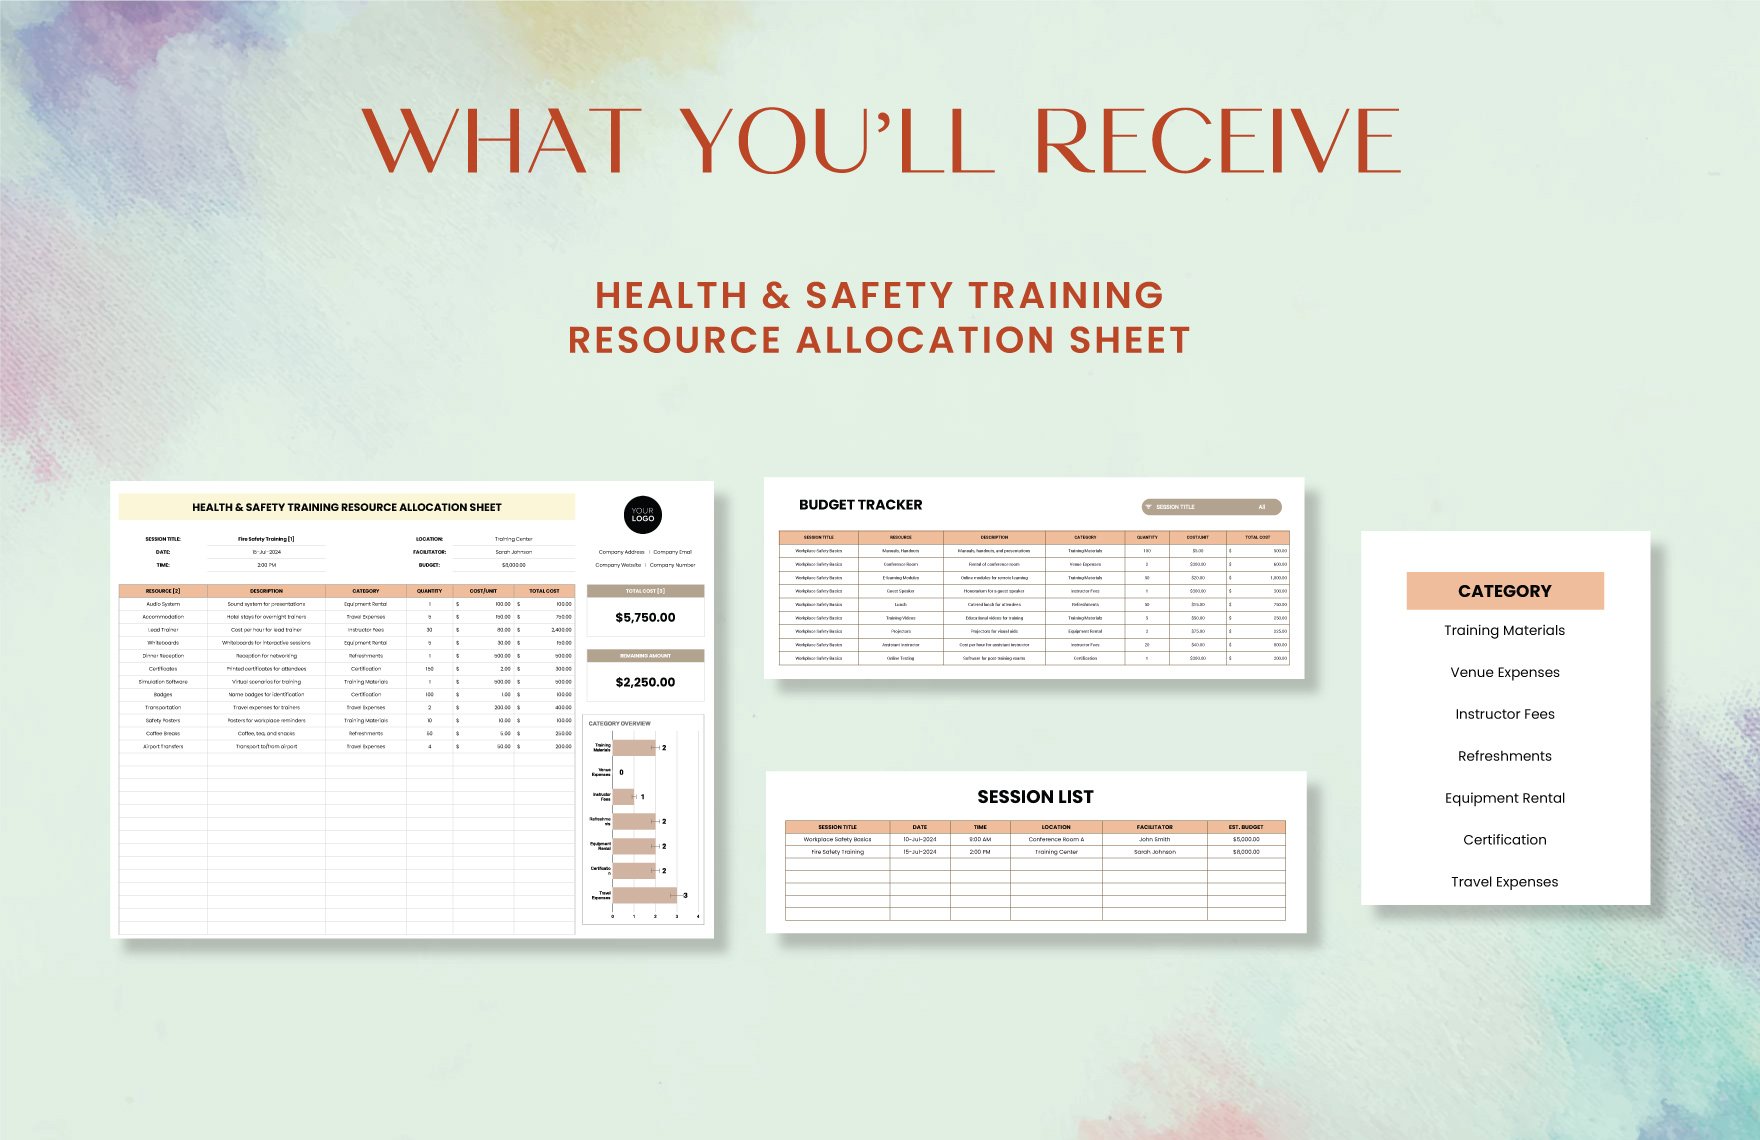 Health & Safety Training Resource Allocation Sheet Template